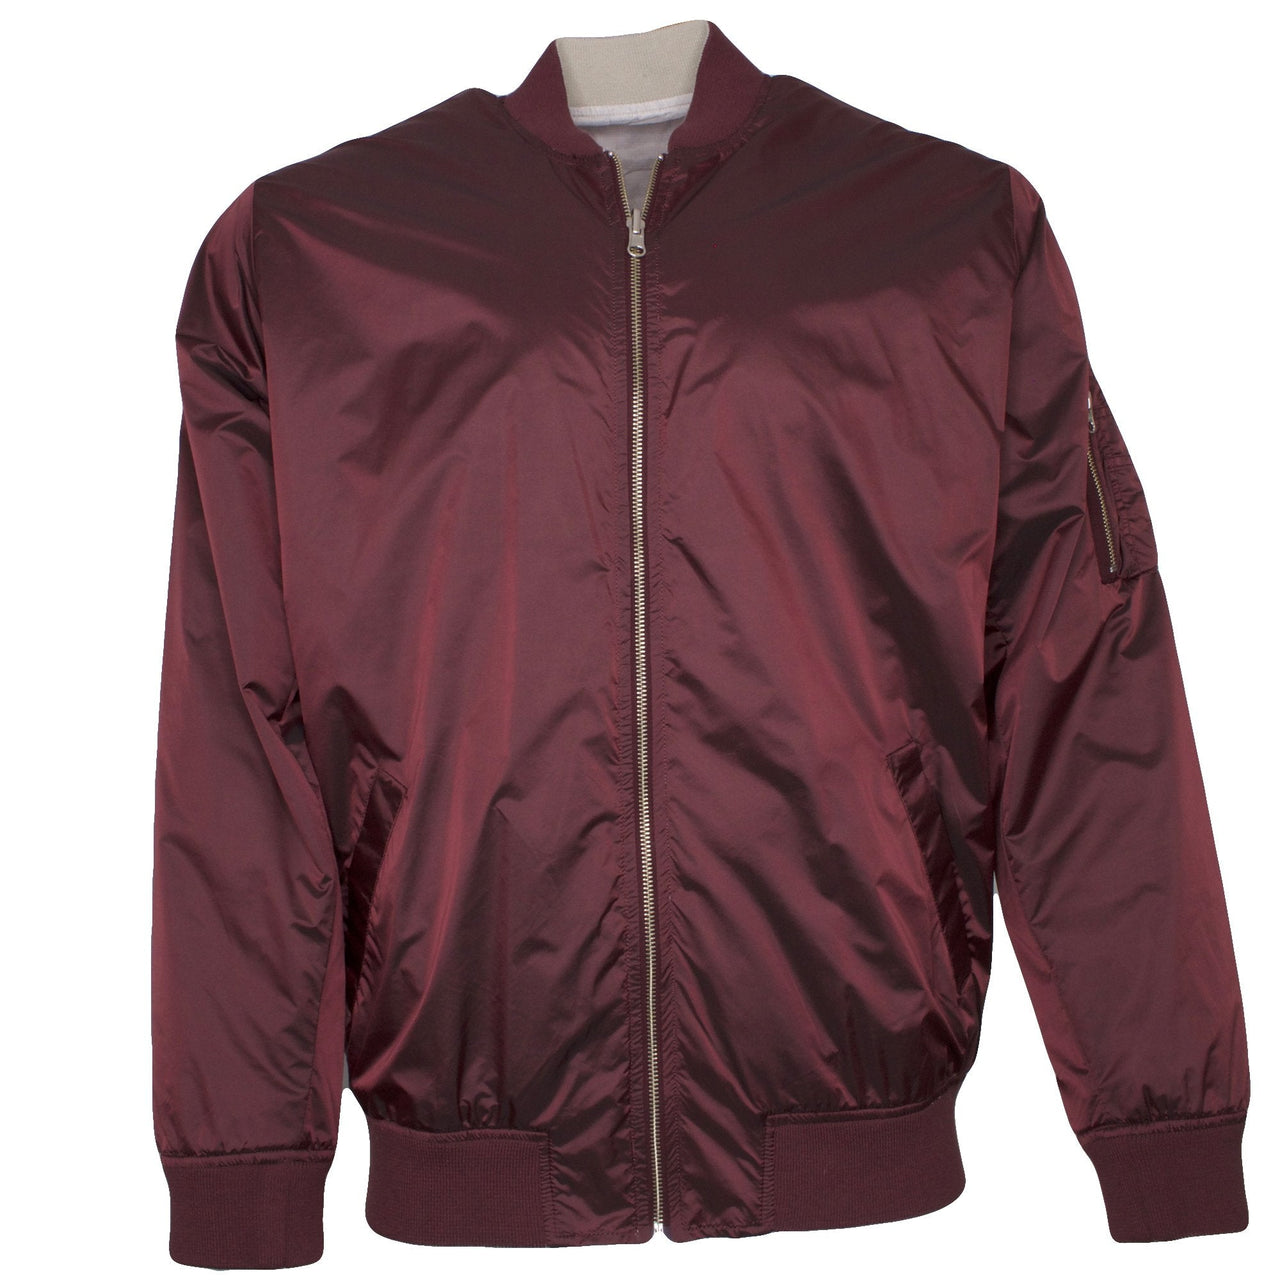 the reversible diamond supply co bomber jacket has a burgundy exterior and a cream interior